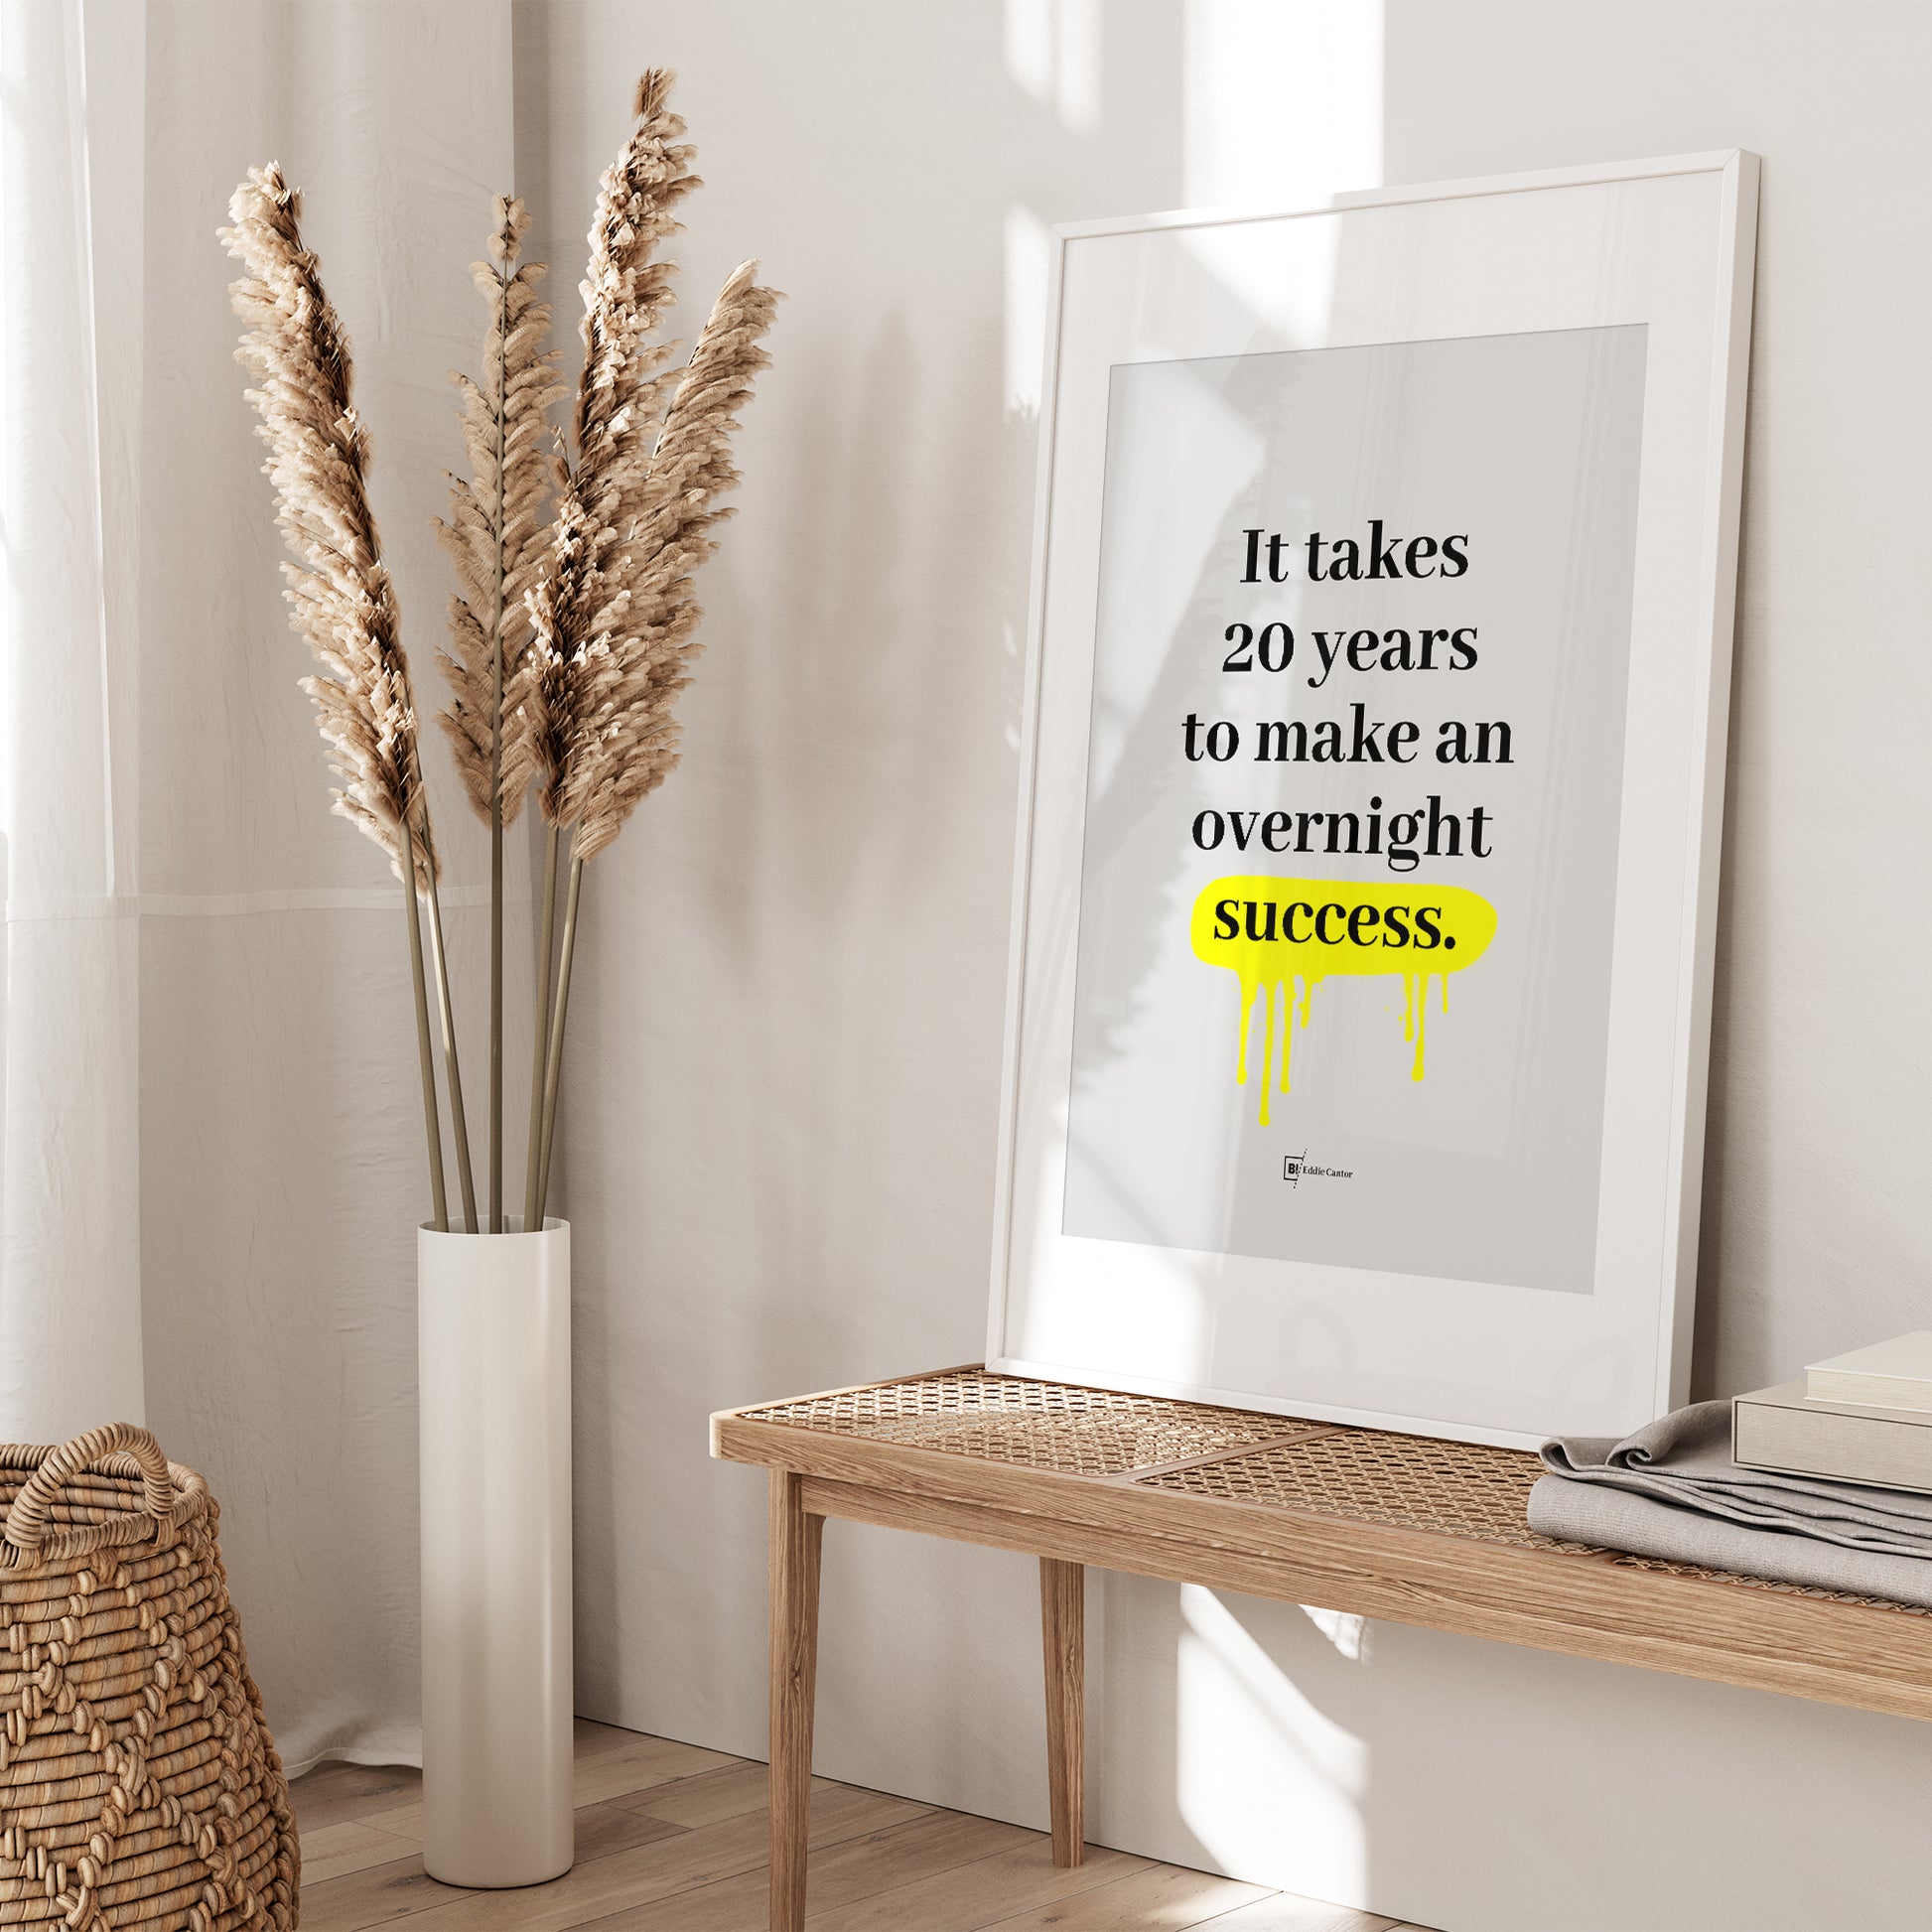 Be inspired by Eddie Cantor's famous "It takes 20 years to make an overnight success" quote art print. This artwork was printed using the giclée process on archival acid-free paper and is presented in a white frame with passe-partout that captures its timeless beauty in every detail.